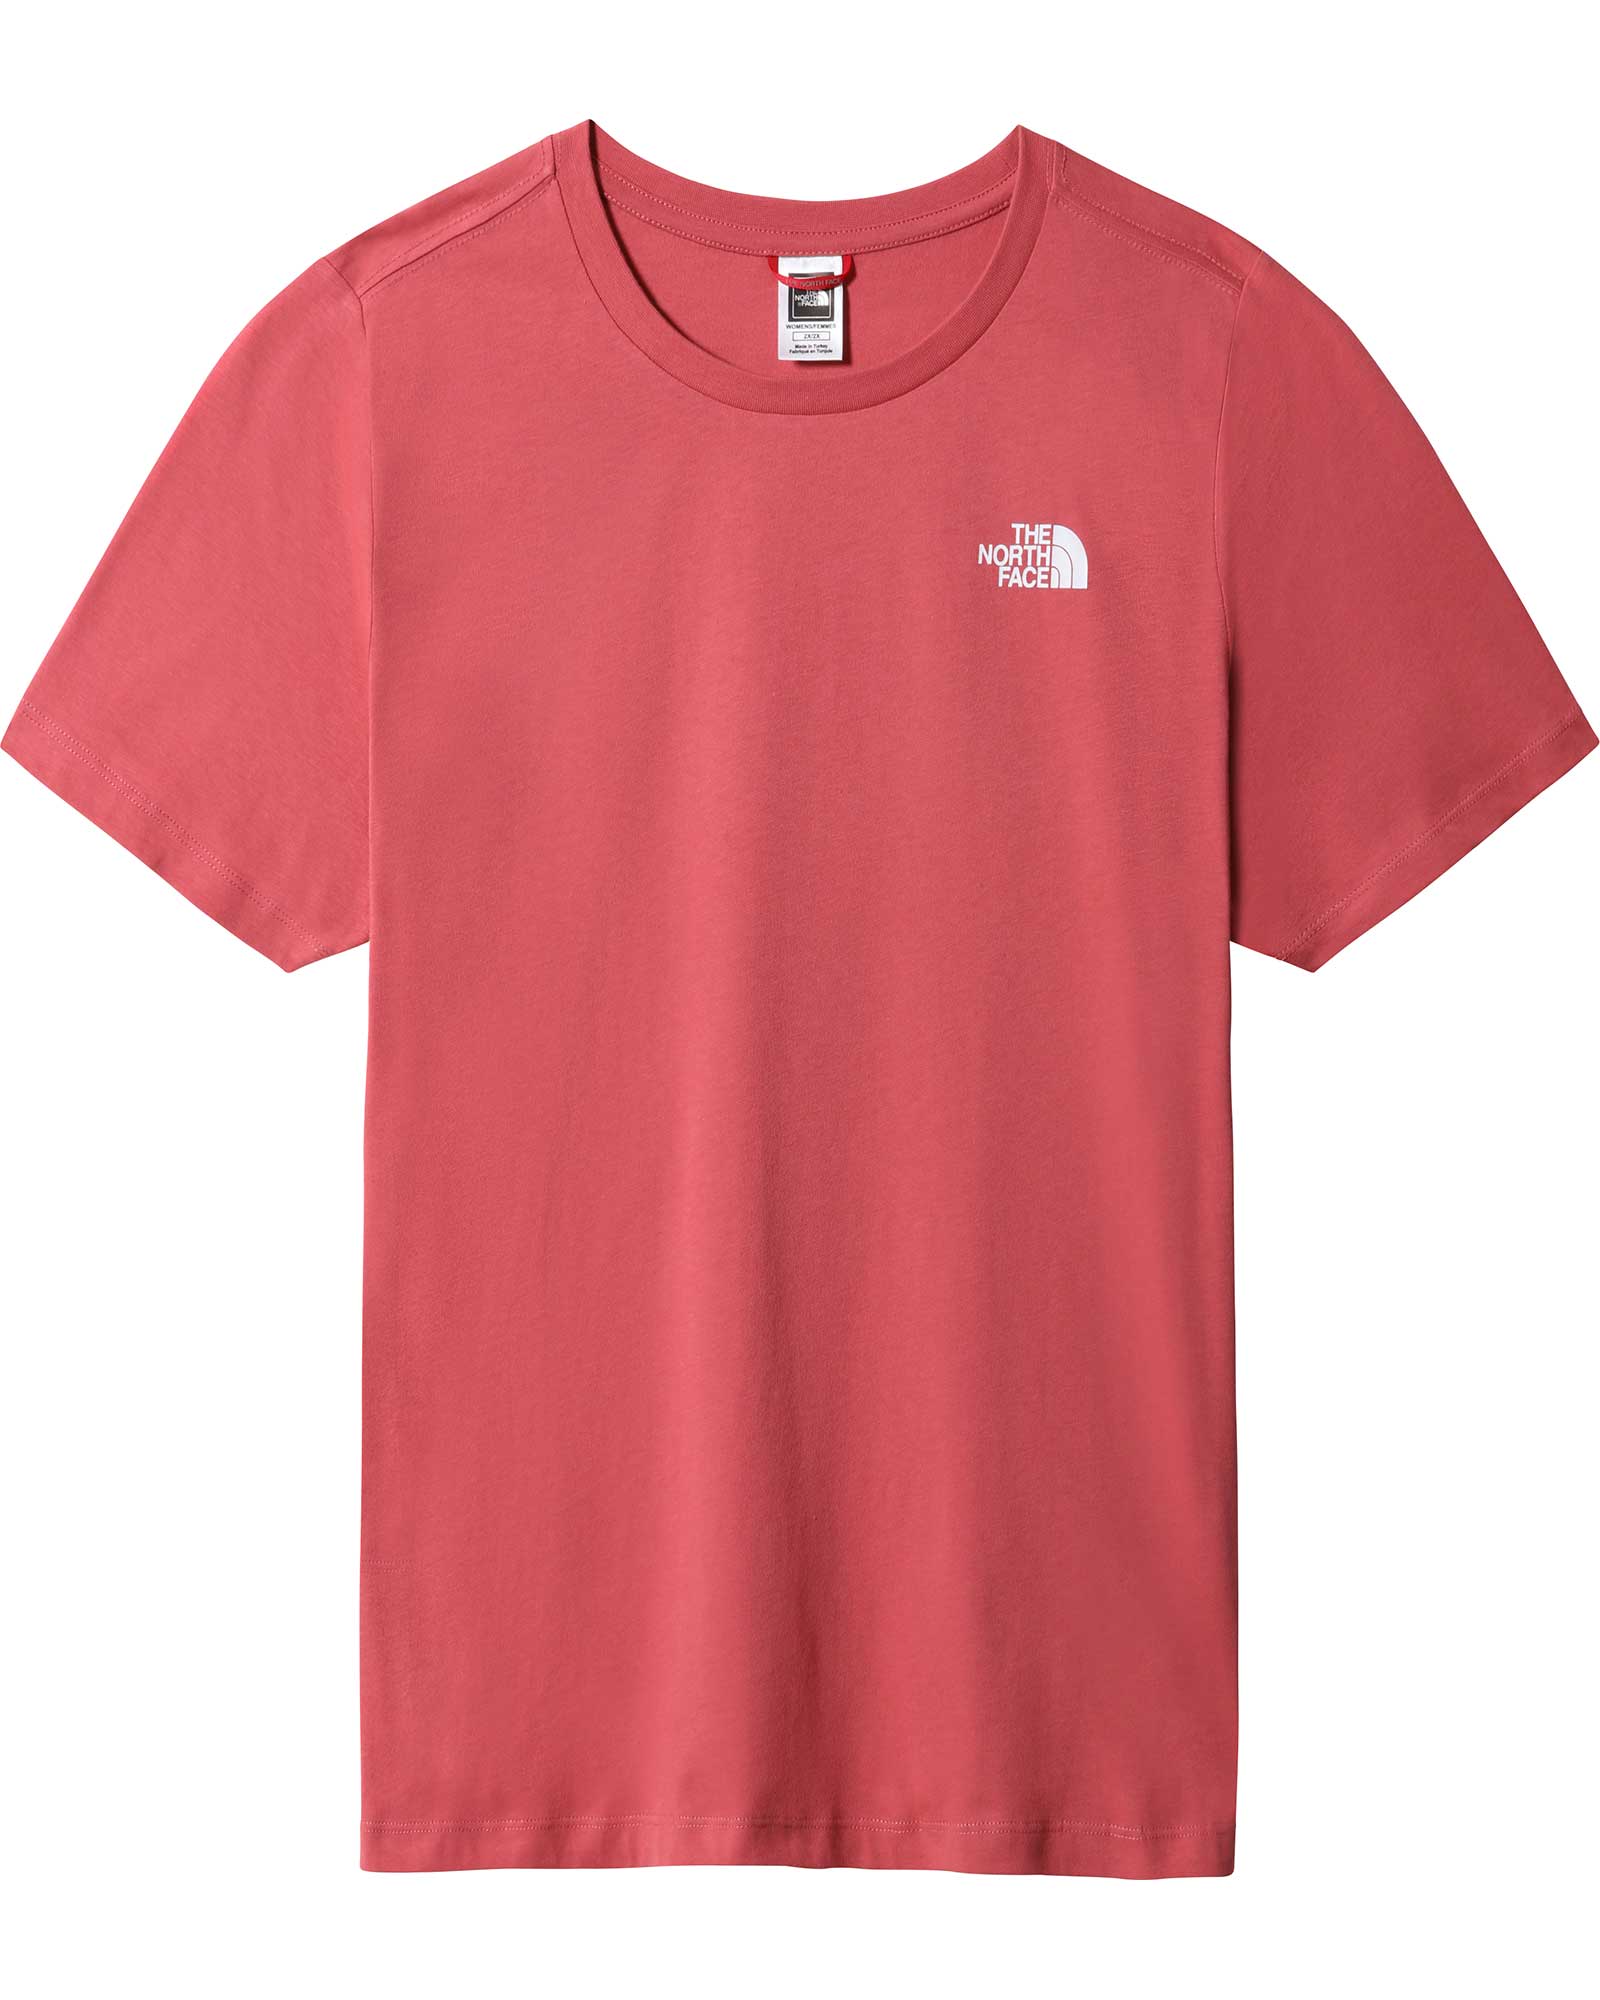 The North Face Plus Simple Dome Women’s T Shirt - Slate Rose 2X